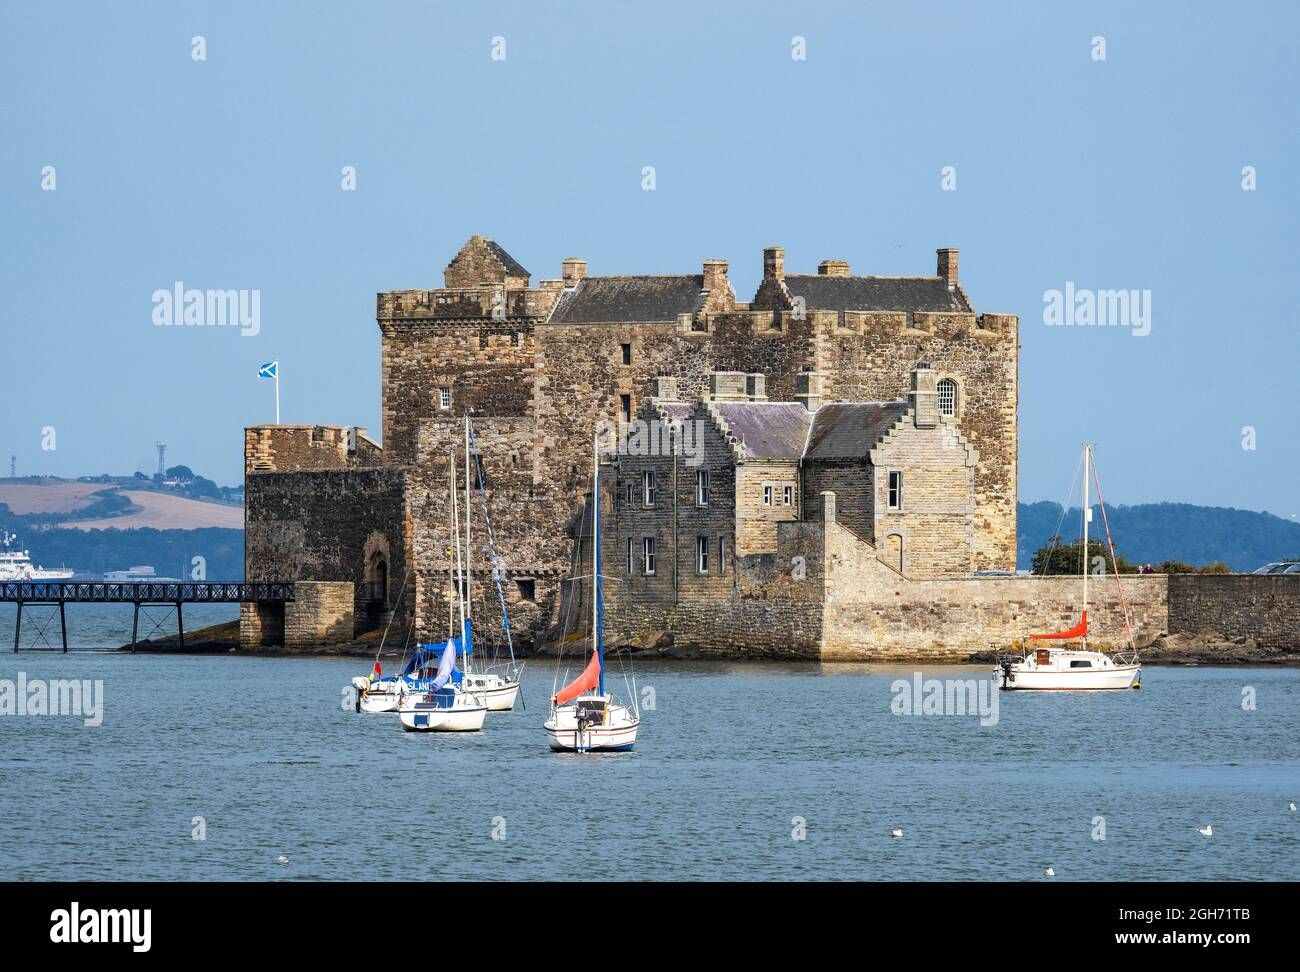 Blackness castle on the shores of the Firth of Forth. The Castle has been used in the past as a film set, most recently for the Outlander TV series. Stock Photo